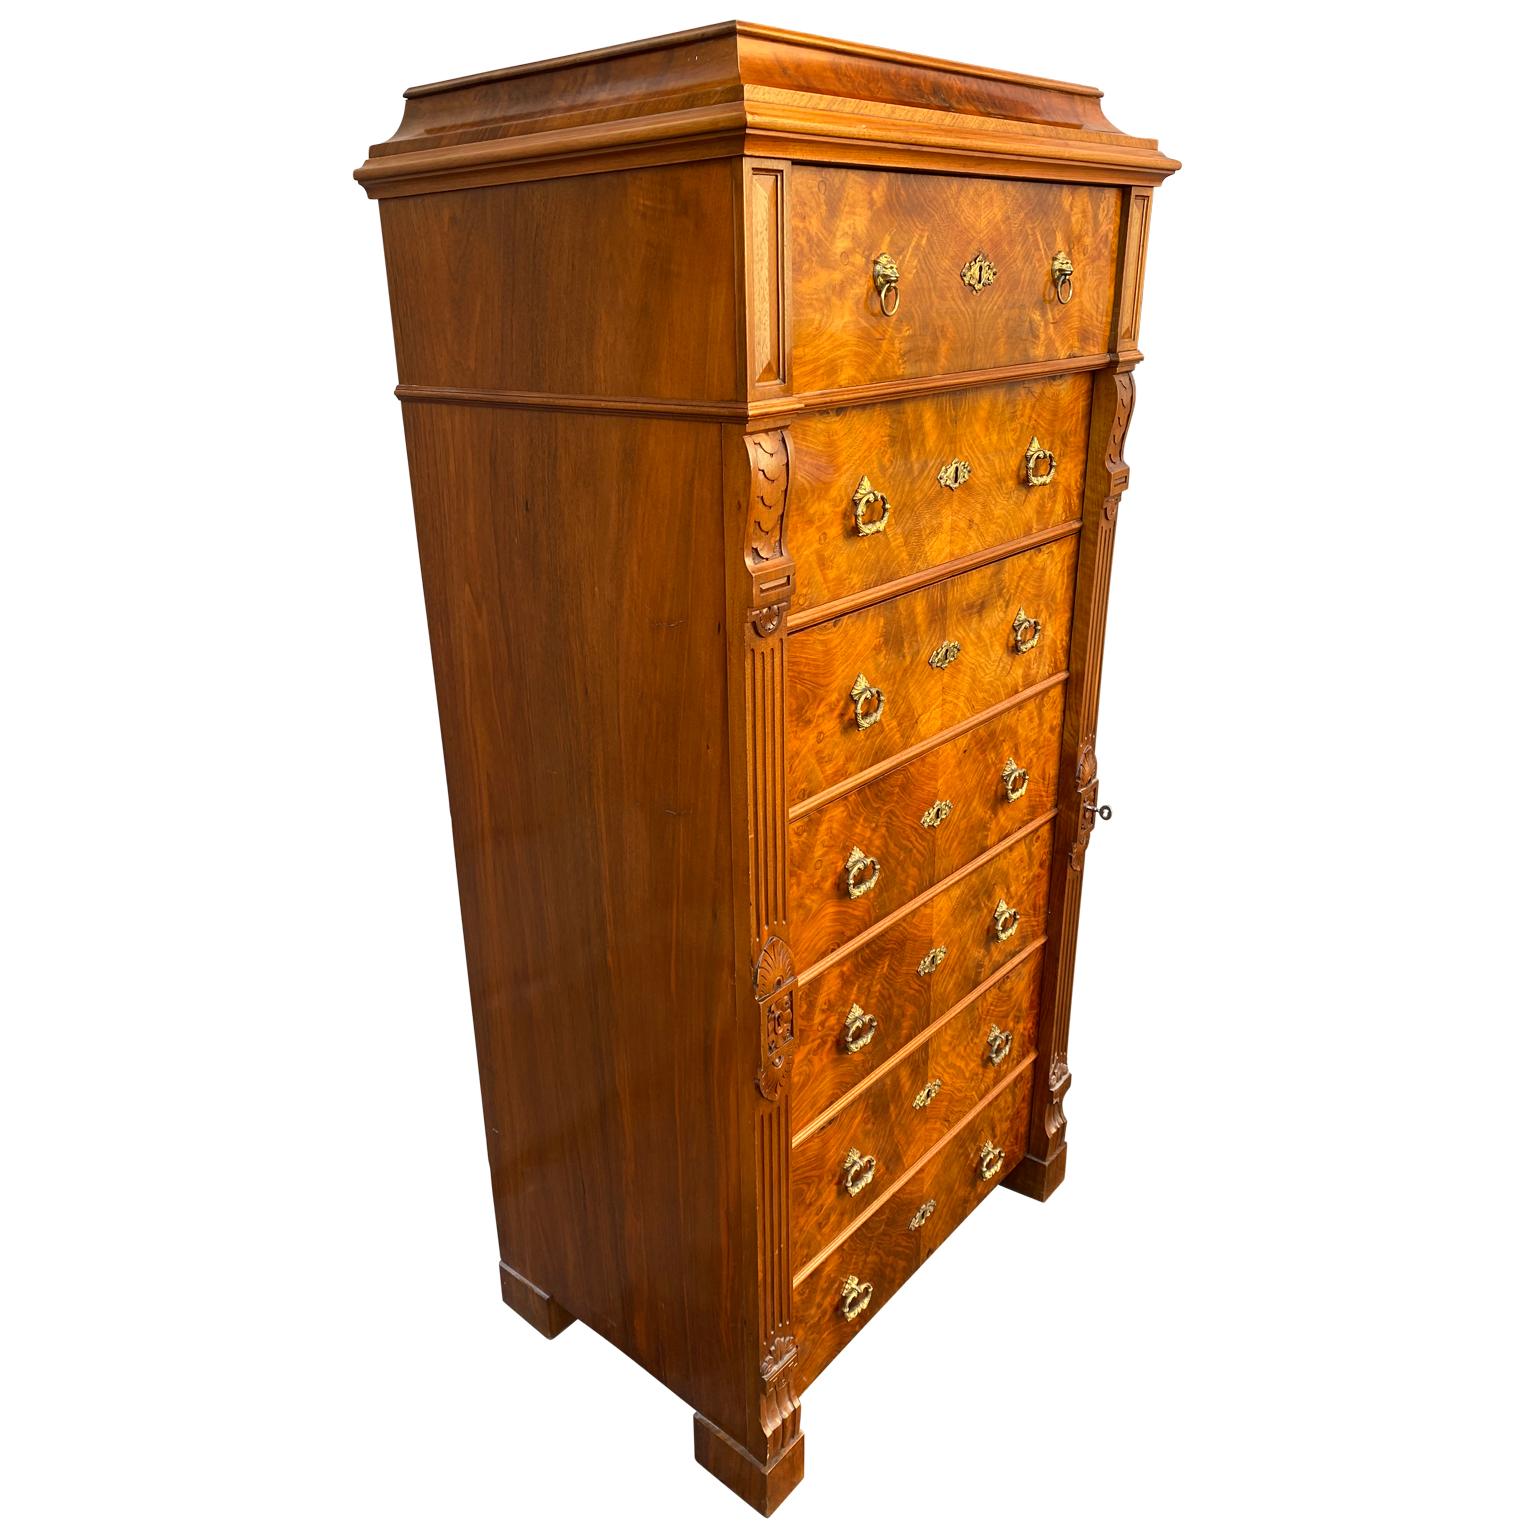 Swedish walnut veneered tallboy chest of 6 drawers with brass hardware.

Top drawer opens to function as small desk. Brass hardware has lion heads.